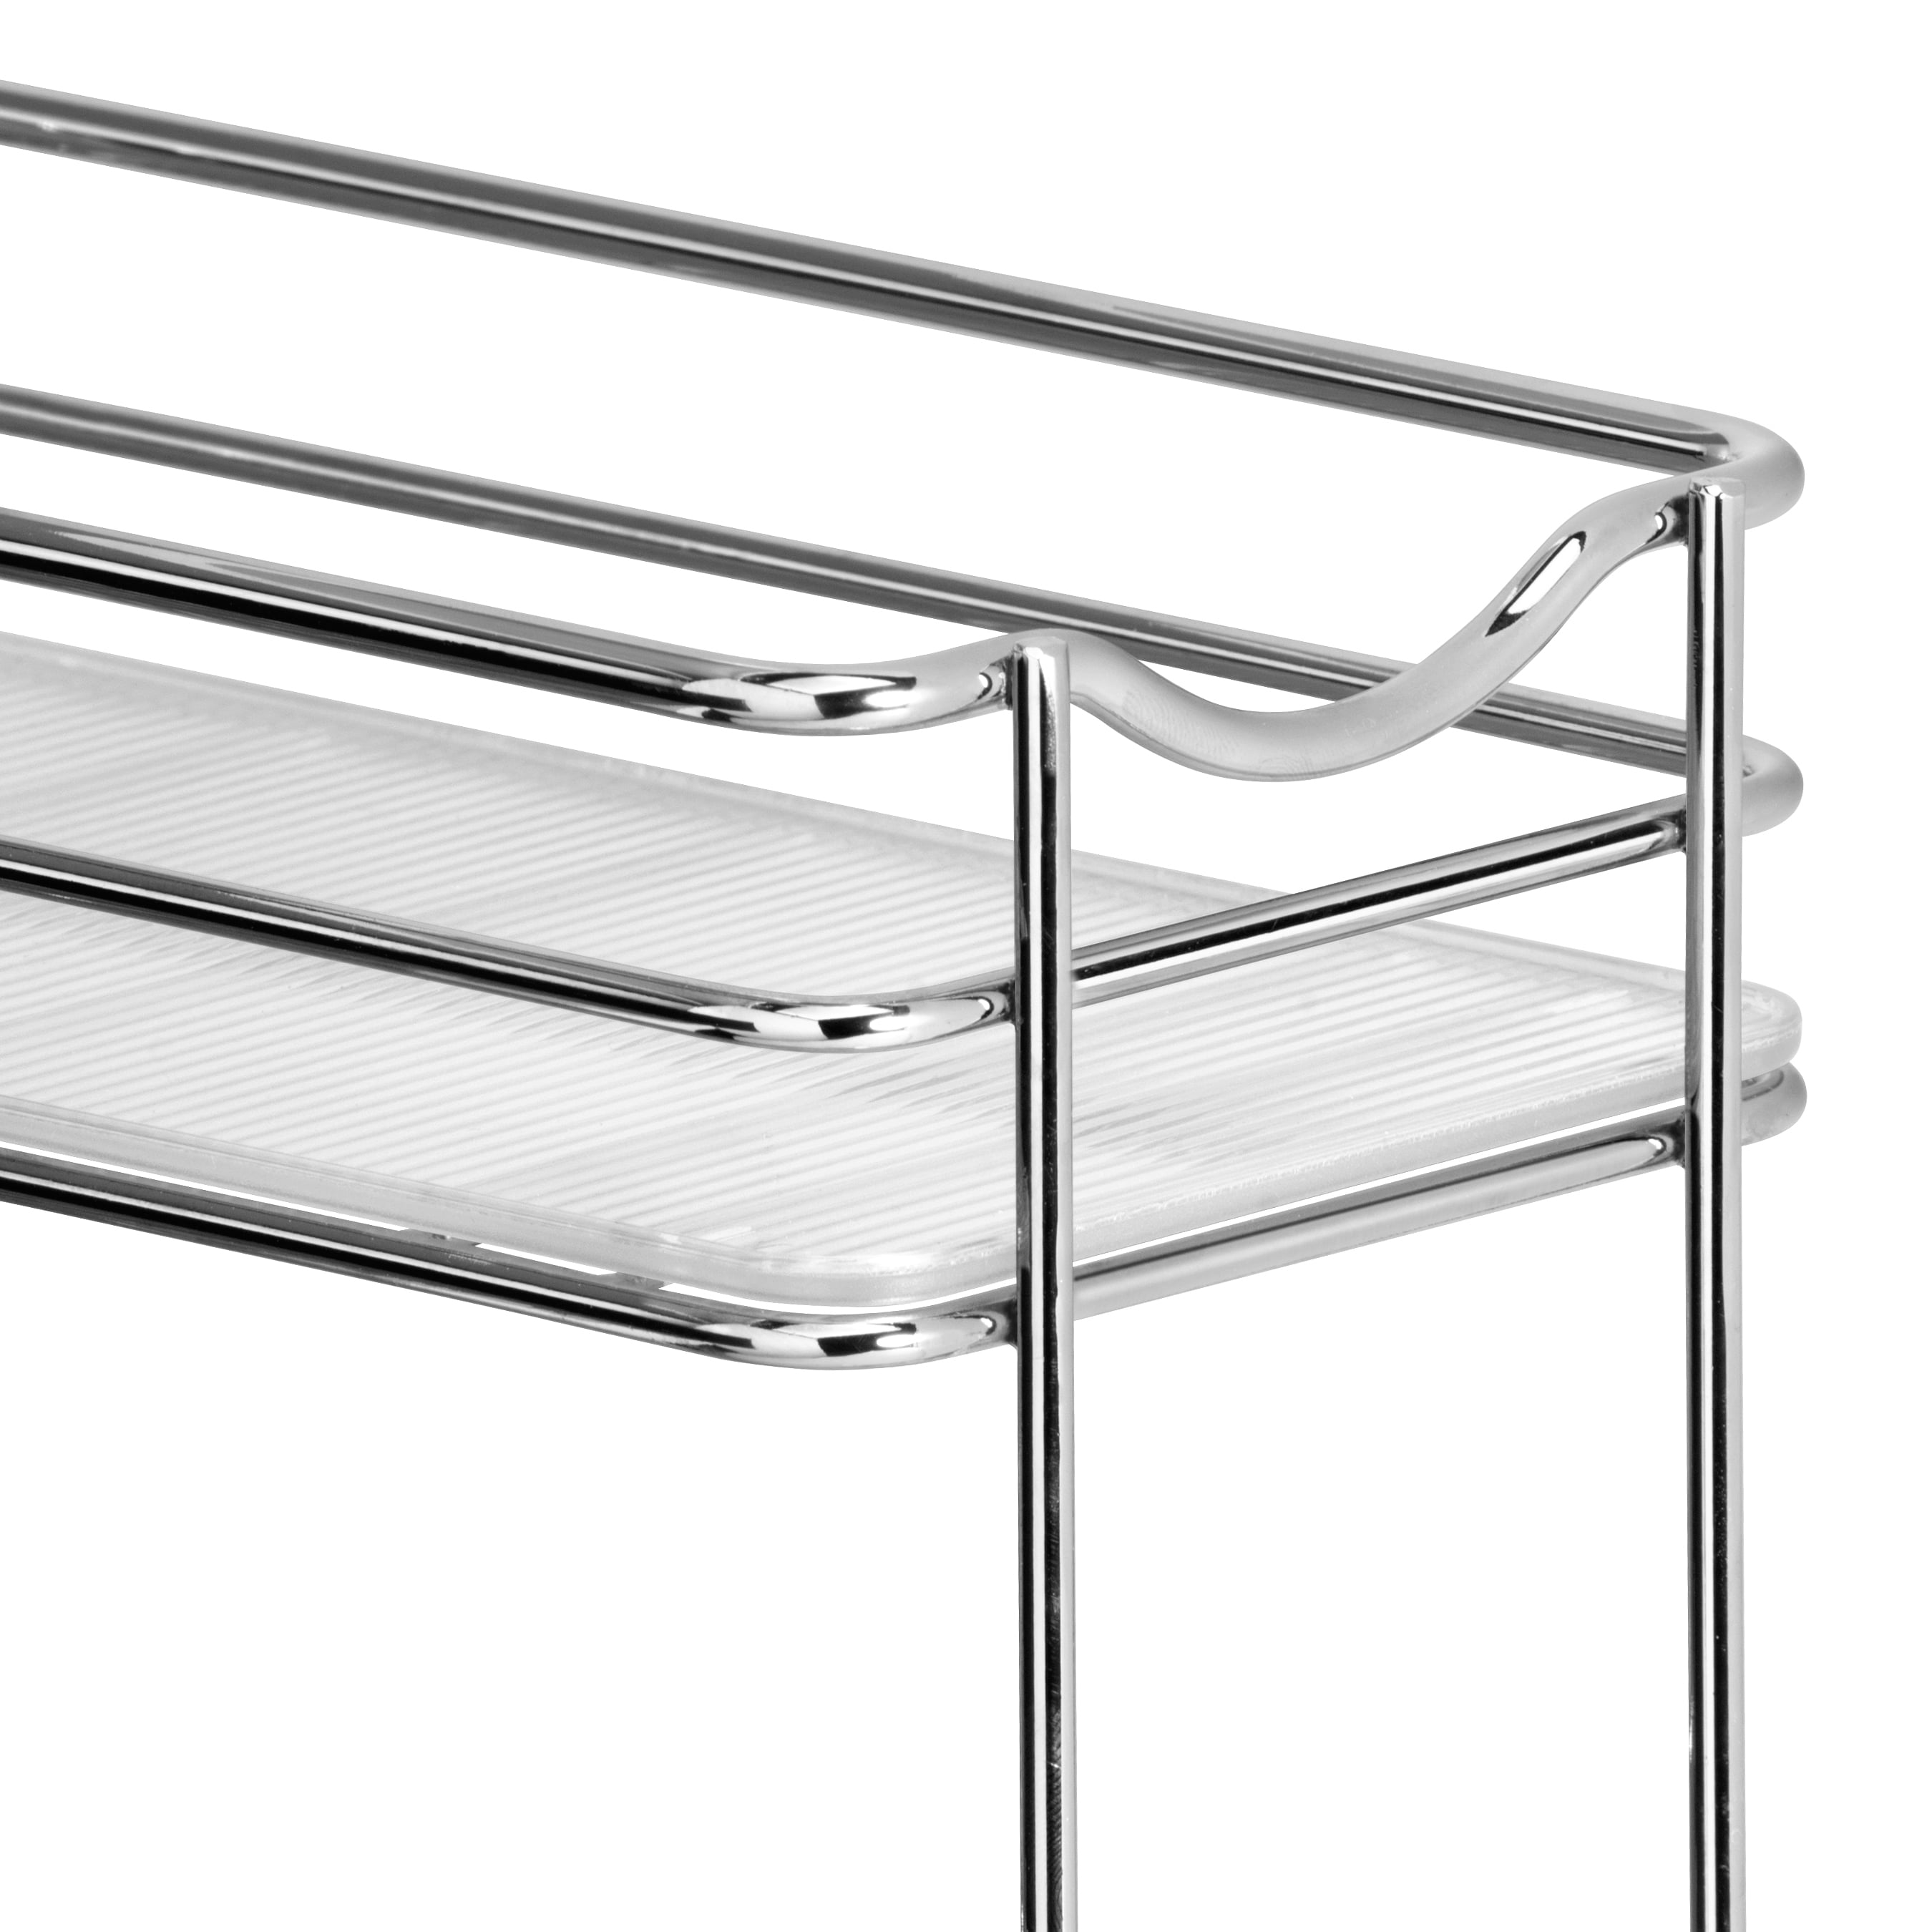 LYNK PROFESSIONAL Slide Out Spice Rack Pull Out Cabinet Organizer 4-1/4 in.  Wide - Double, Chrome 430422DS - The Home Depot